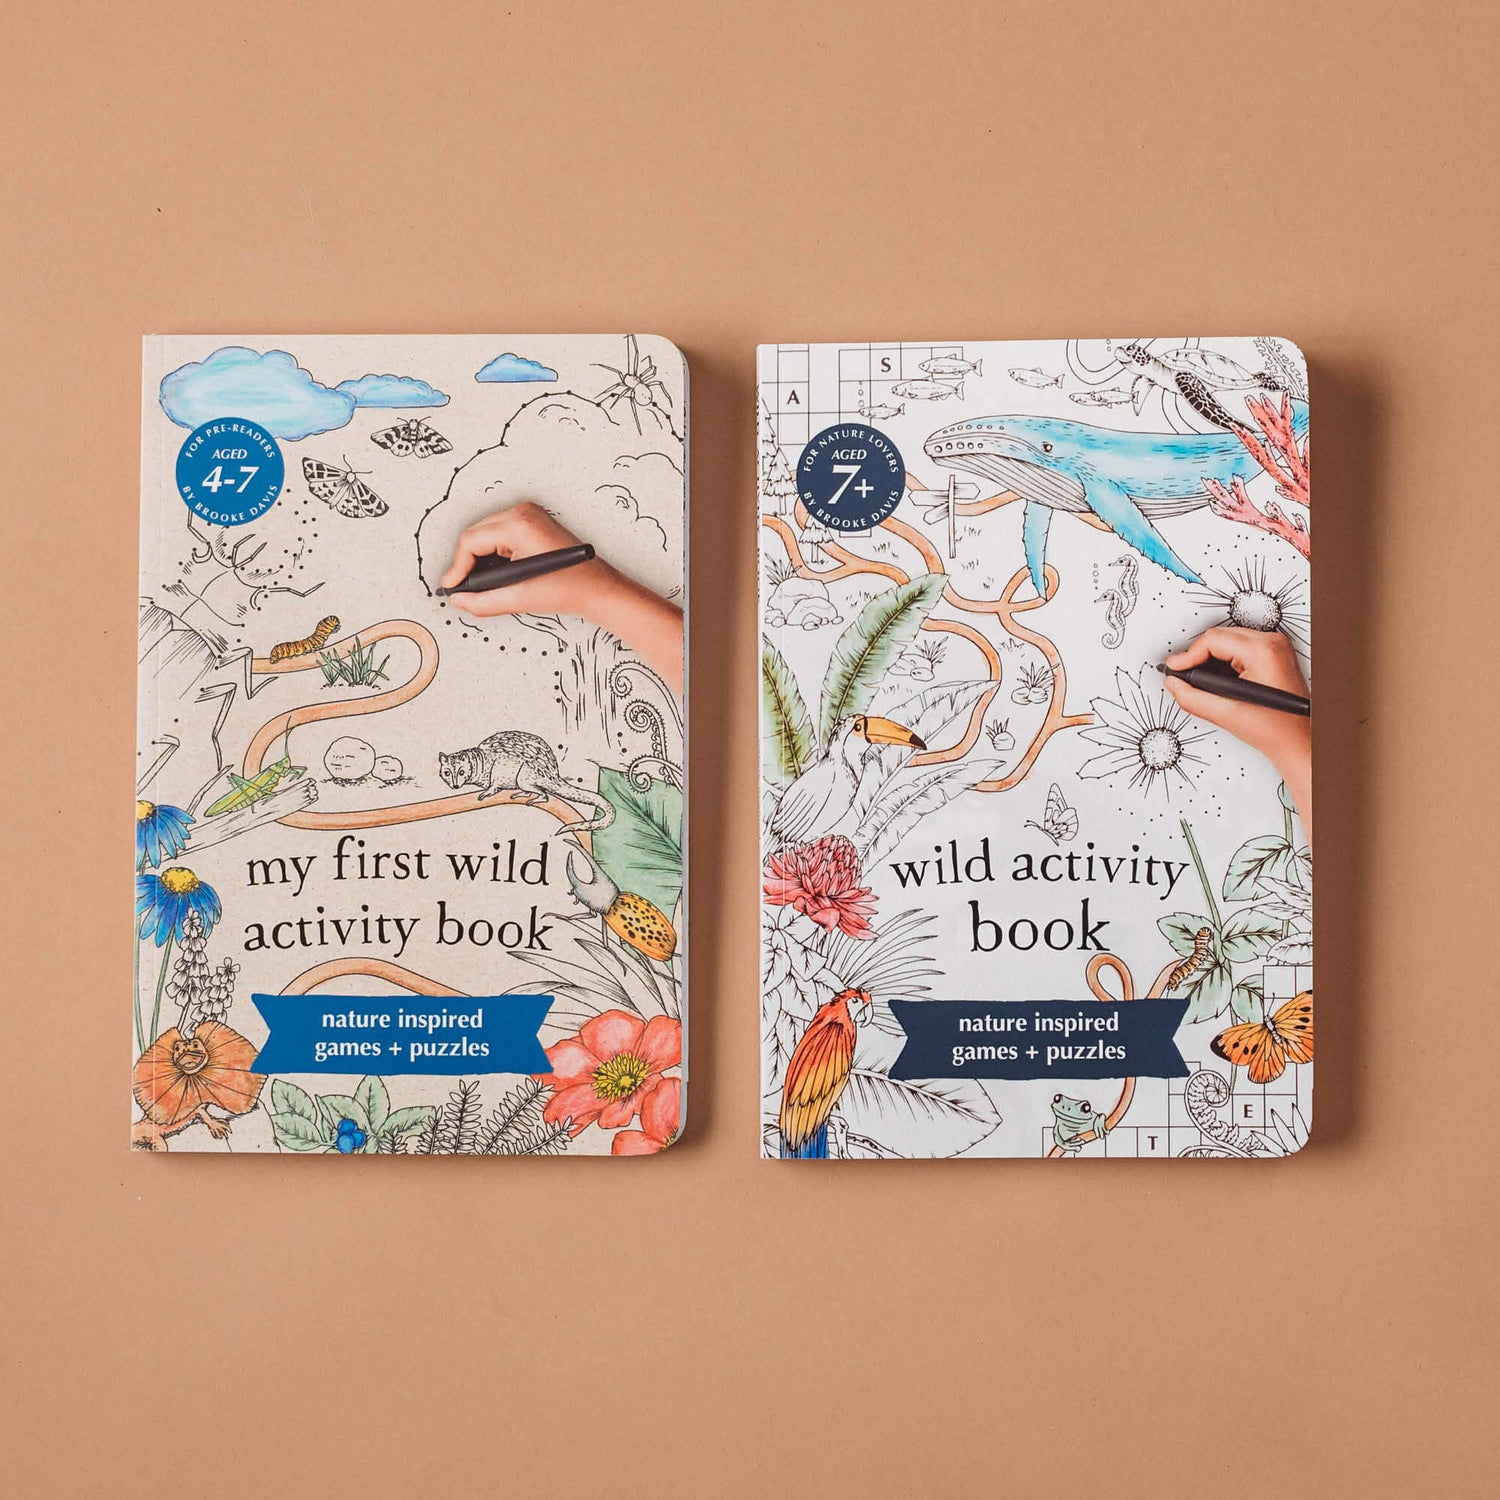 Activity book set for kids, one book is titled My First Wild Activity Book for kids 4-7 years who are learning to read and the other is titled Wild Activity Book and is for kids aged 7+. Both books include nature insprired games and puzzles and are made in Australia.